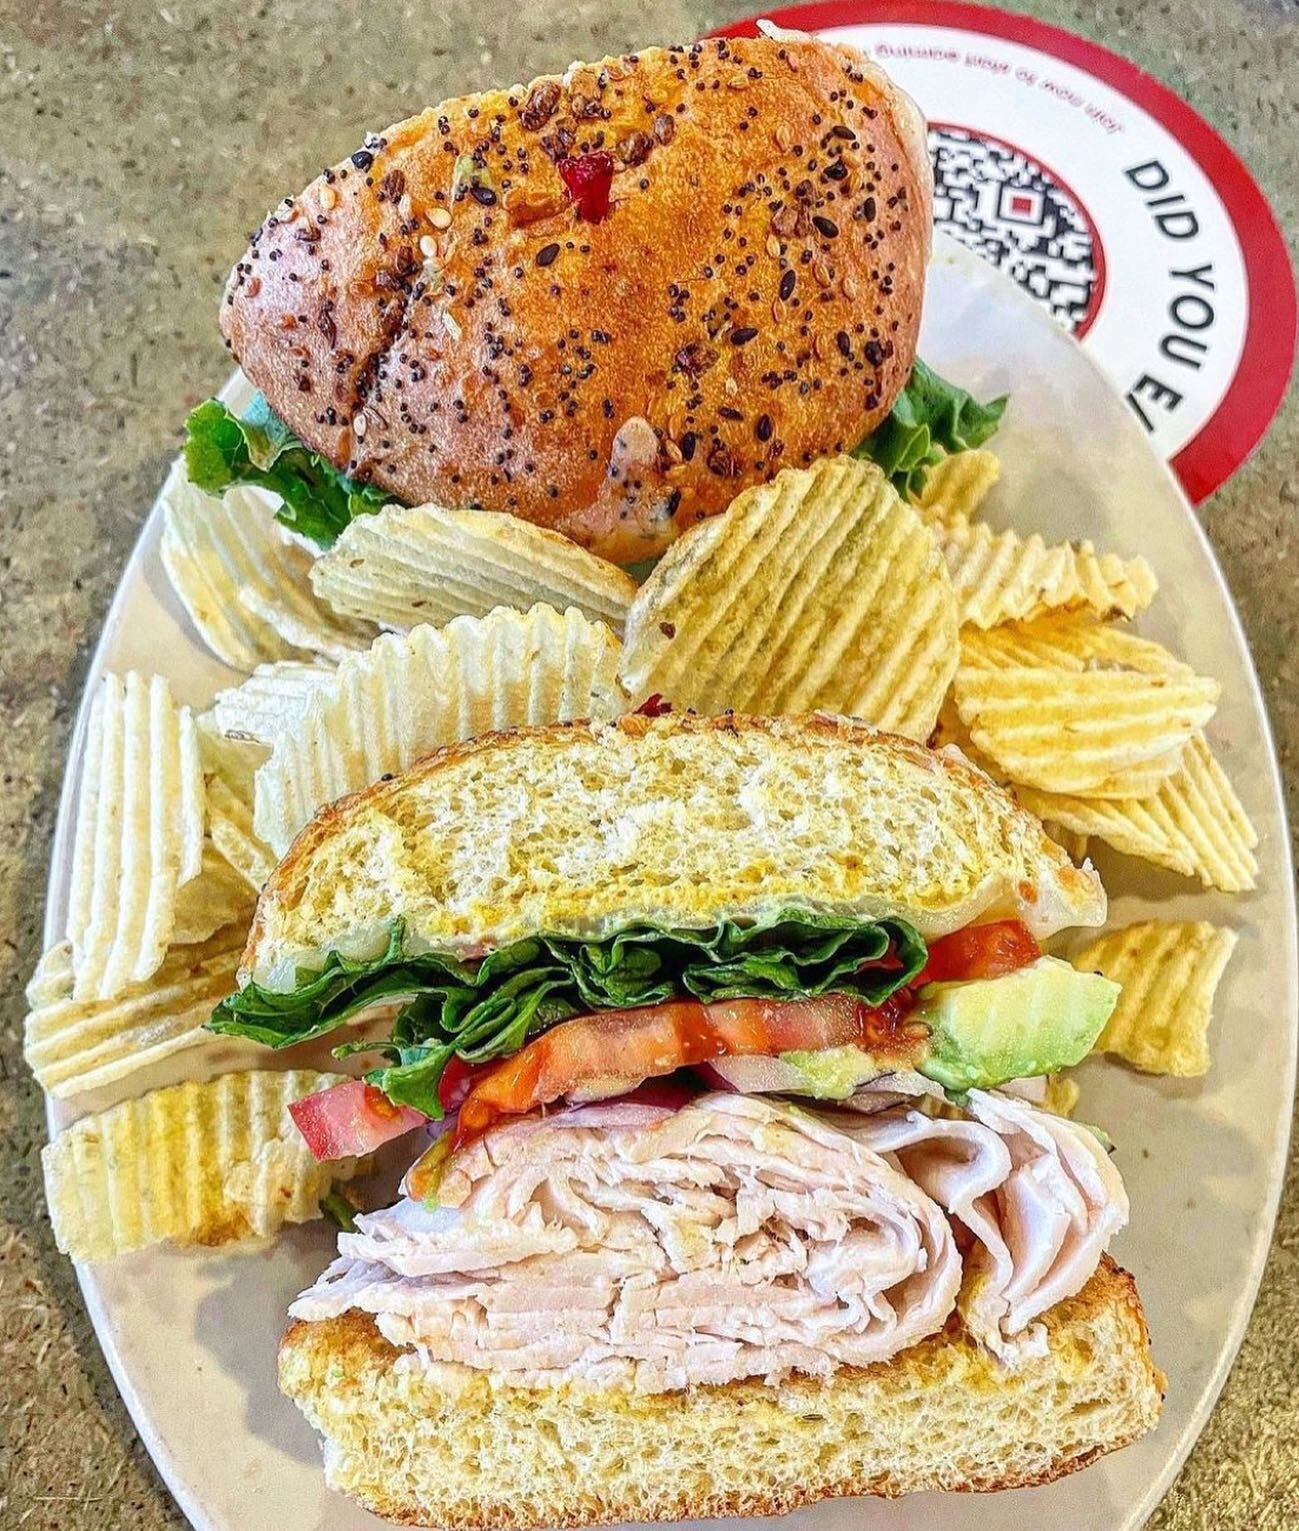 Kick off the weekend by grabbing a bite to eat at your local favorite! 🥪 
.
.
. 
@jasonsdeli @oaksatlakeway #jasonsdeli #atx #oaksatlakeway #sandwich #austintexas #foodie #subs #foodstagram #delicious #yum #lunch #restaurant #deli #austin #tomato #a